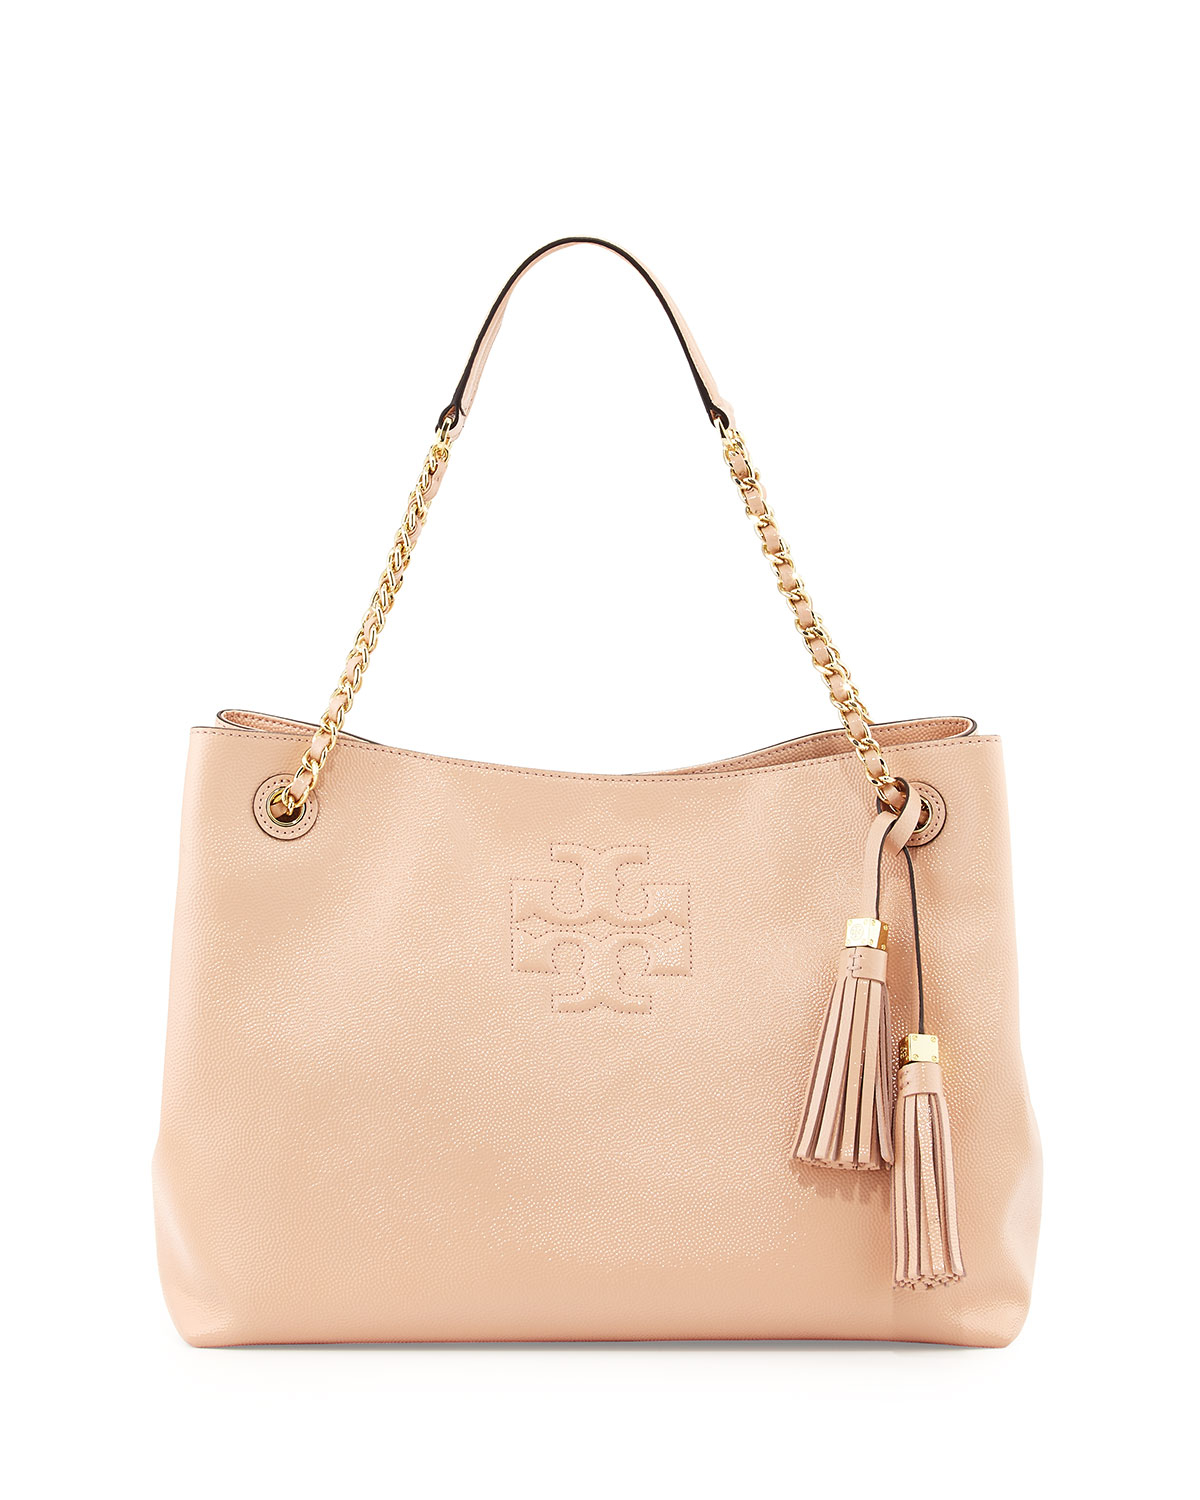 Lyst - Tory Burch Thea Patent Chain-Strap Shoulder Bag in Natural